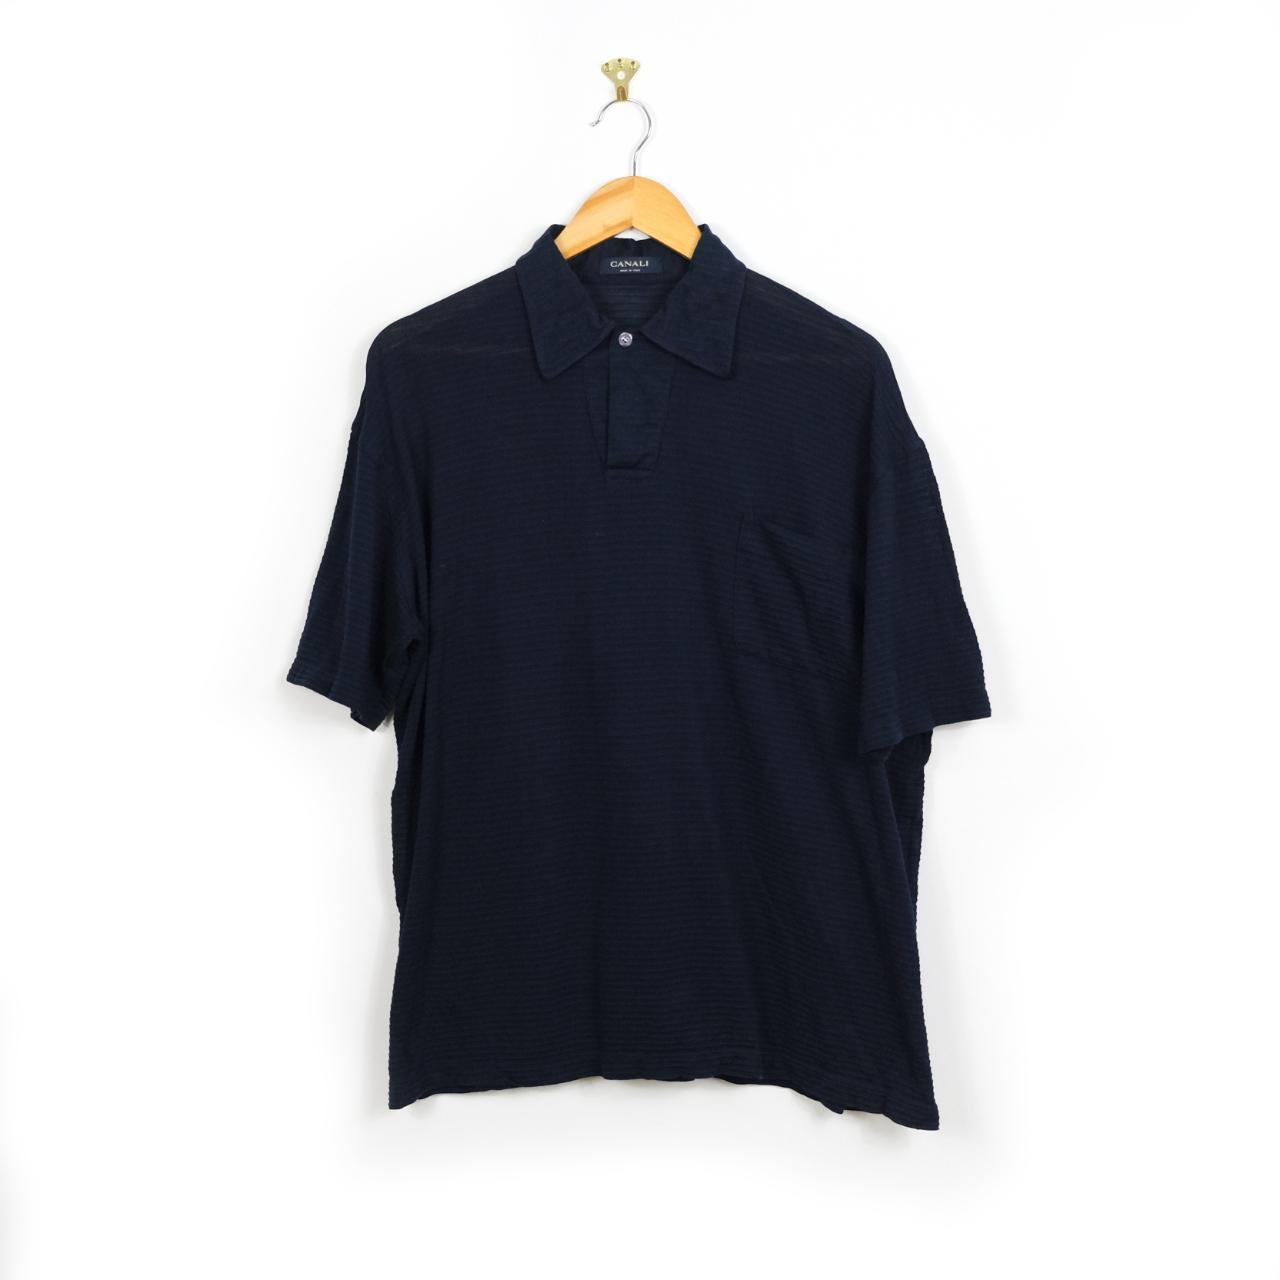 Canali Men's Blue and Navy Polo-shirts | Depop